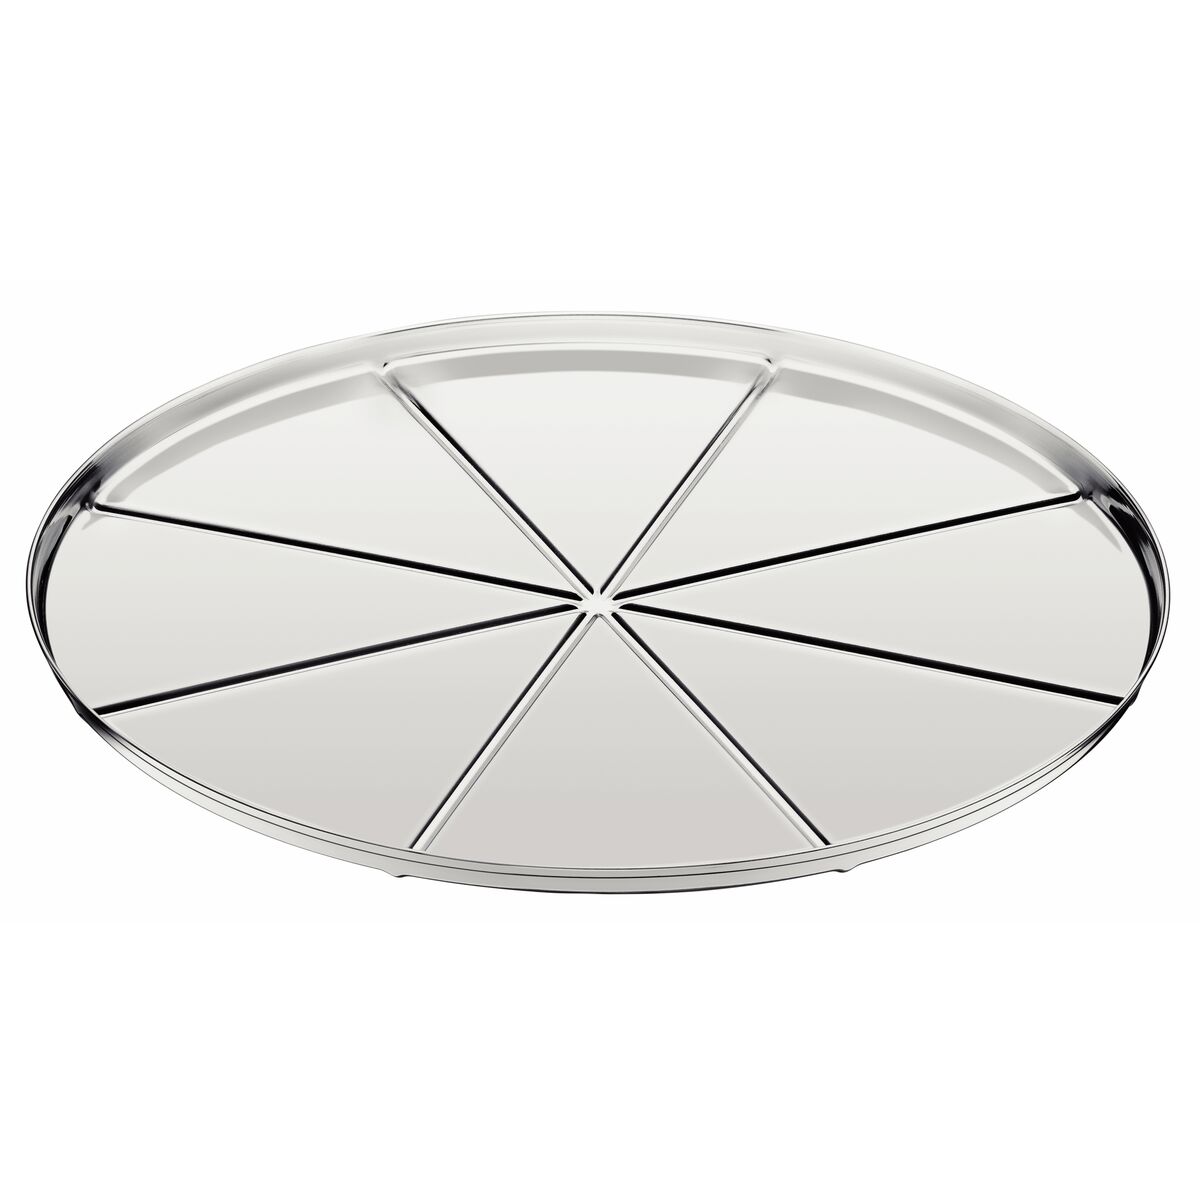 Tramontina 30 cm Grooved Stainless Steel Pizza Pan